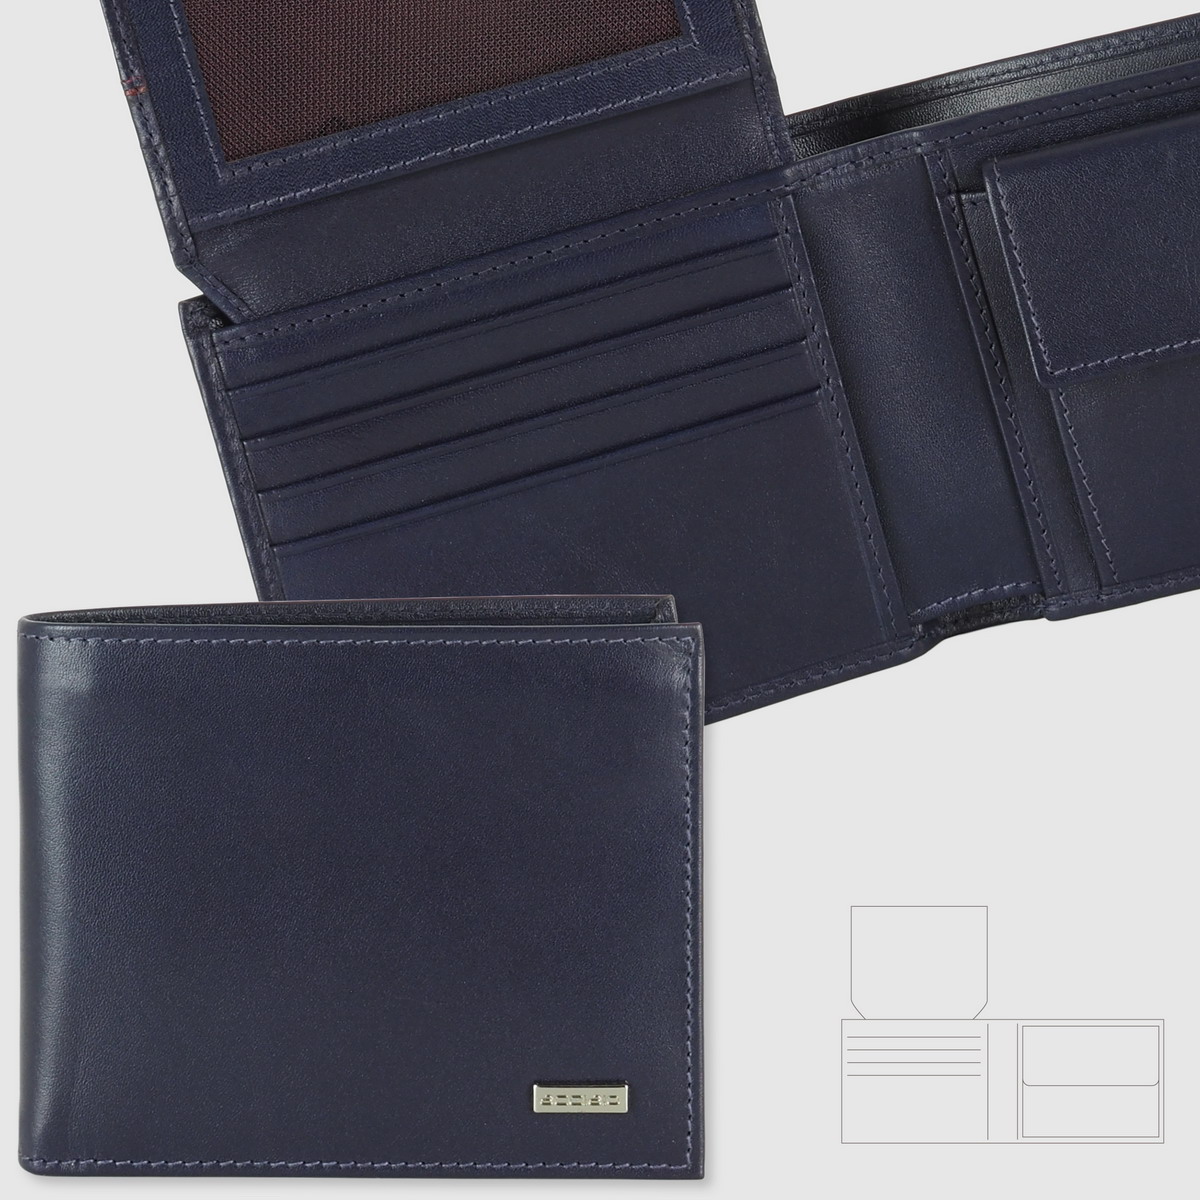 Man's leather wallet with flap